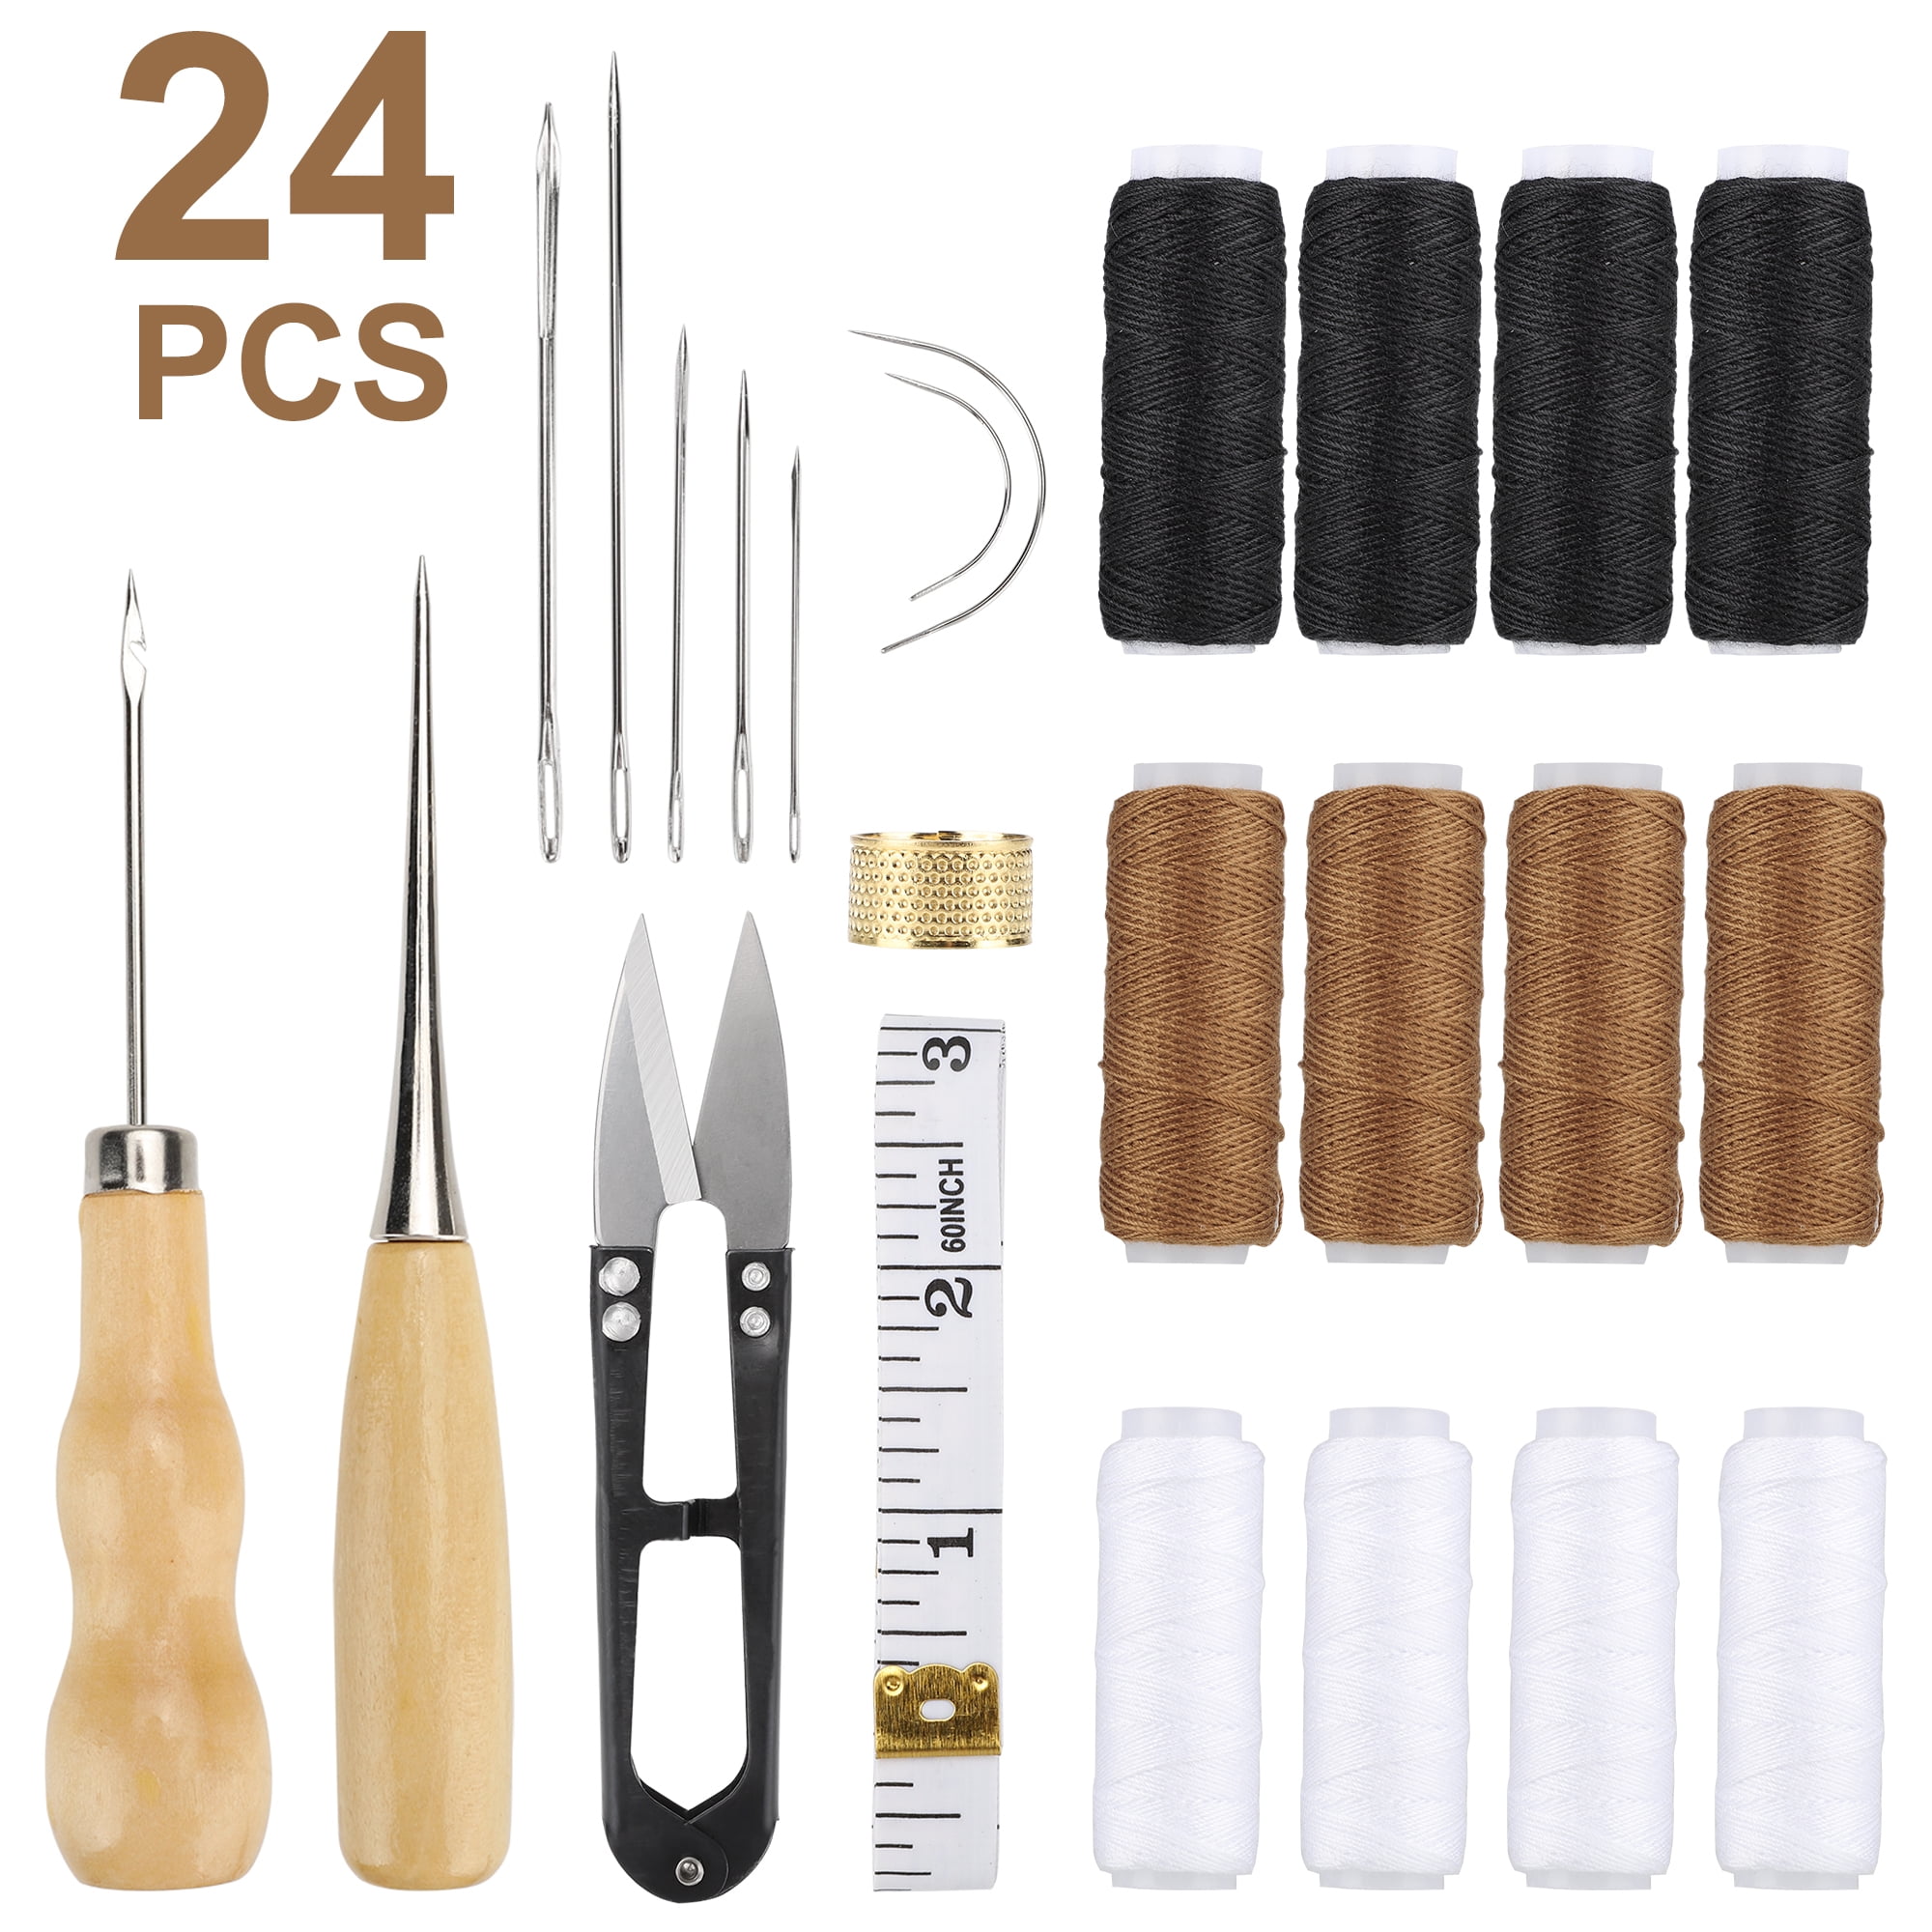 HASTHIP 16pcs Leather Sewing Tools, Upholstery Repair Kit with